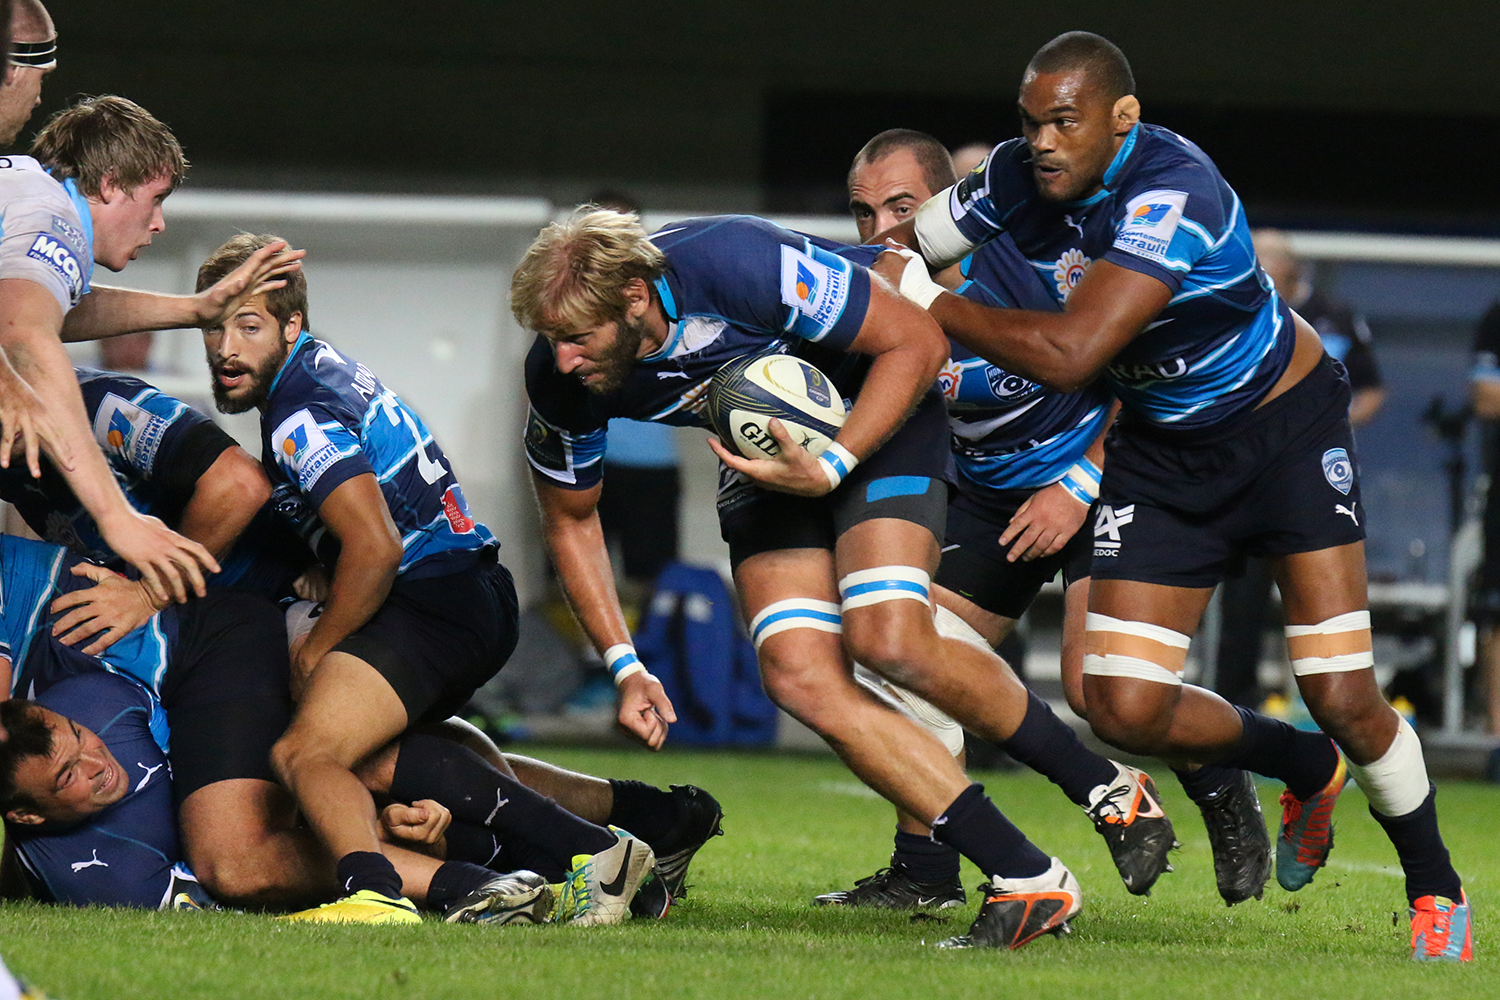 Match Rugby Montpellier vs Bath en direct live streaming